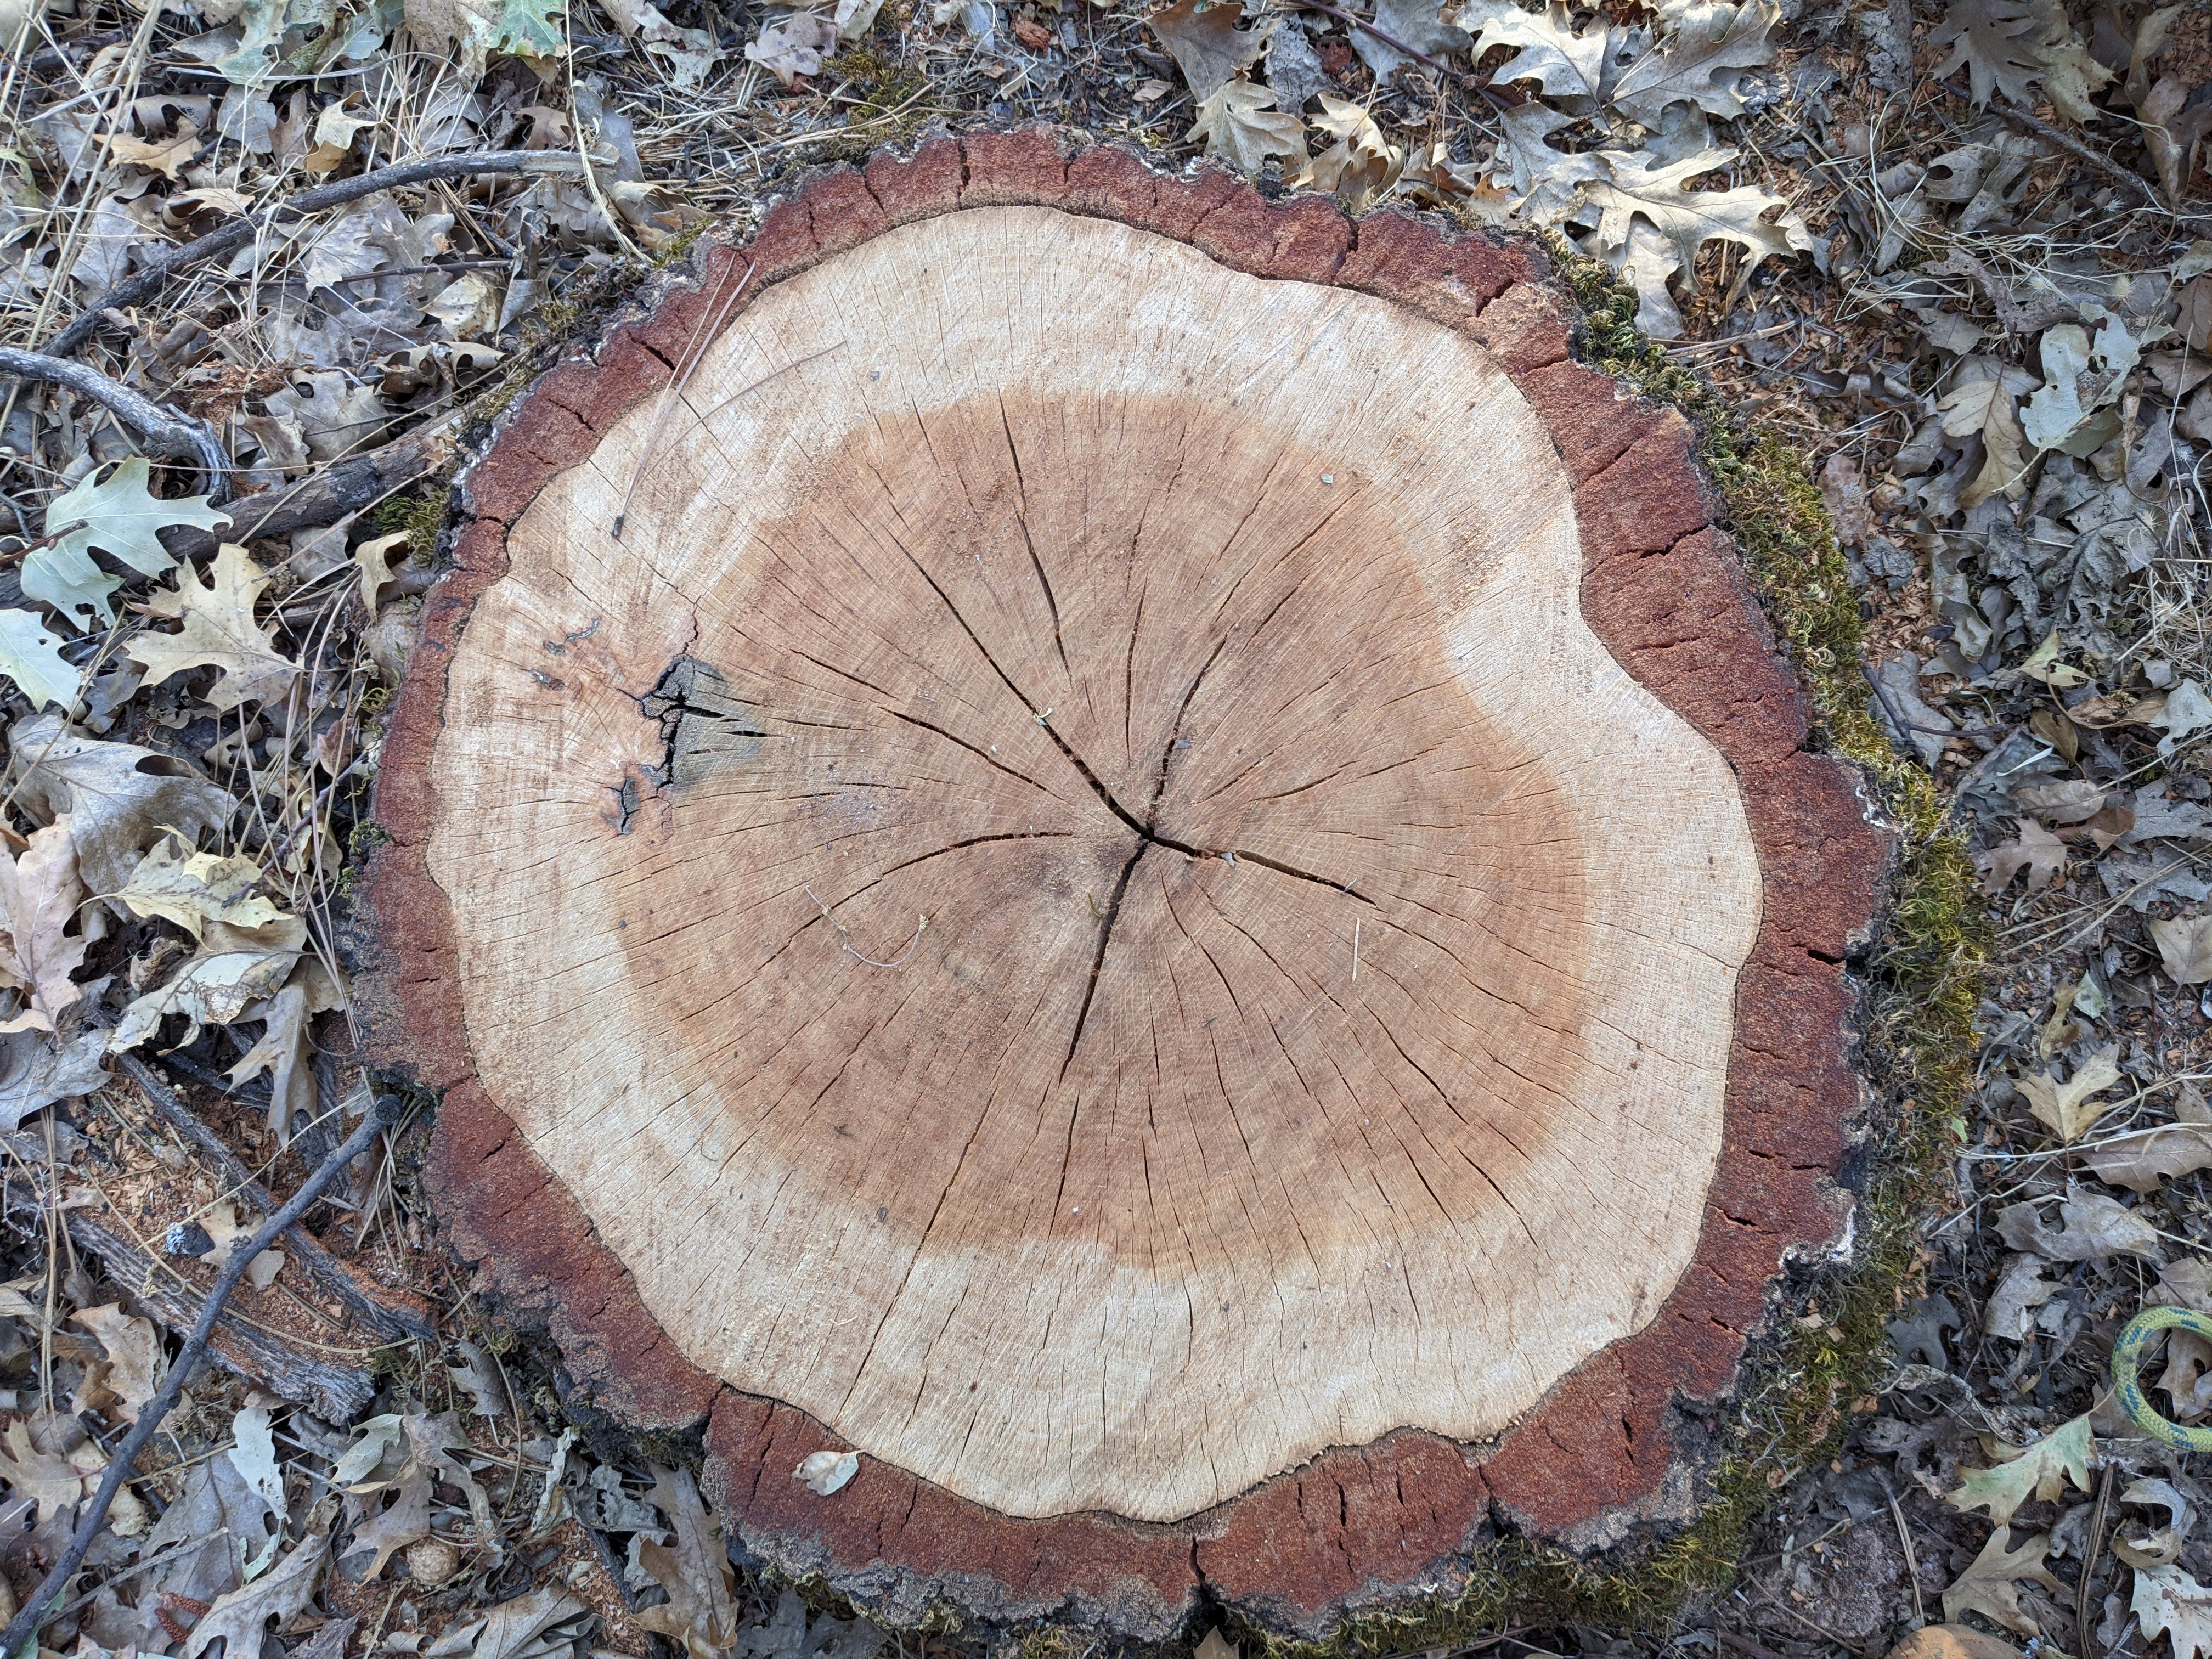 Looking down at a freshly cut stump. 